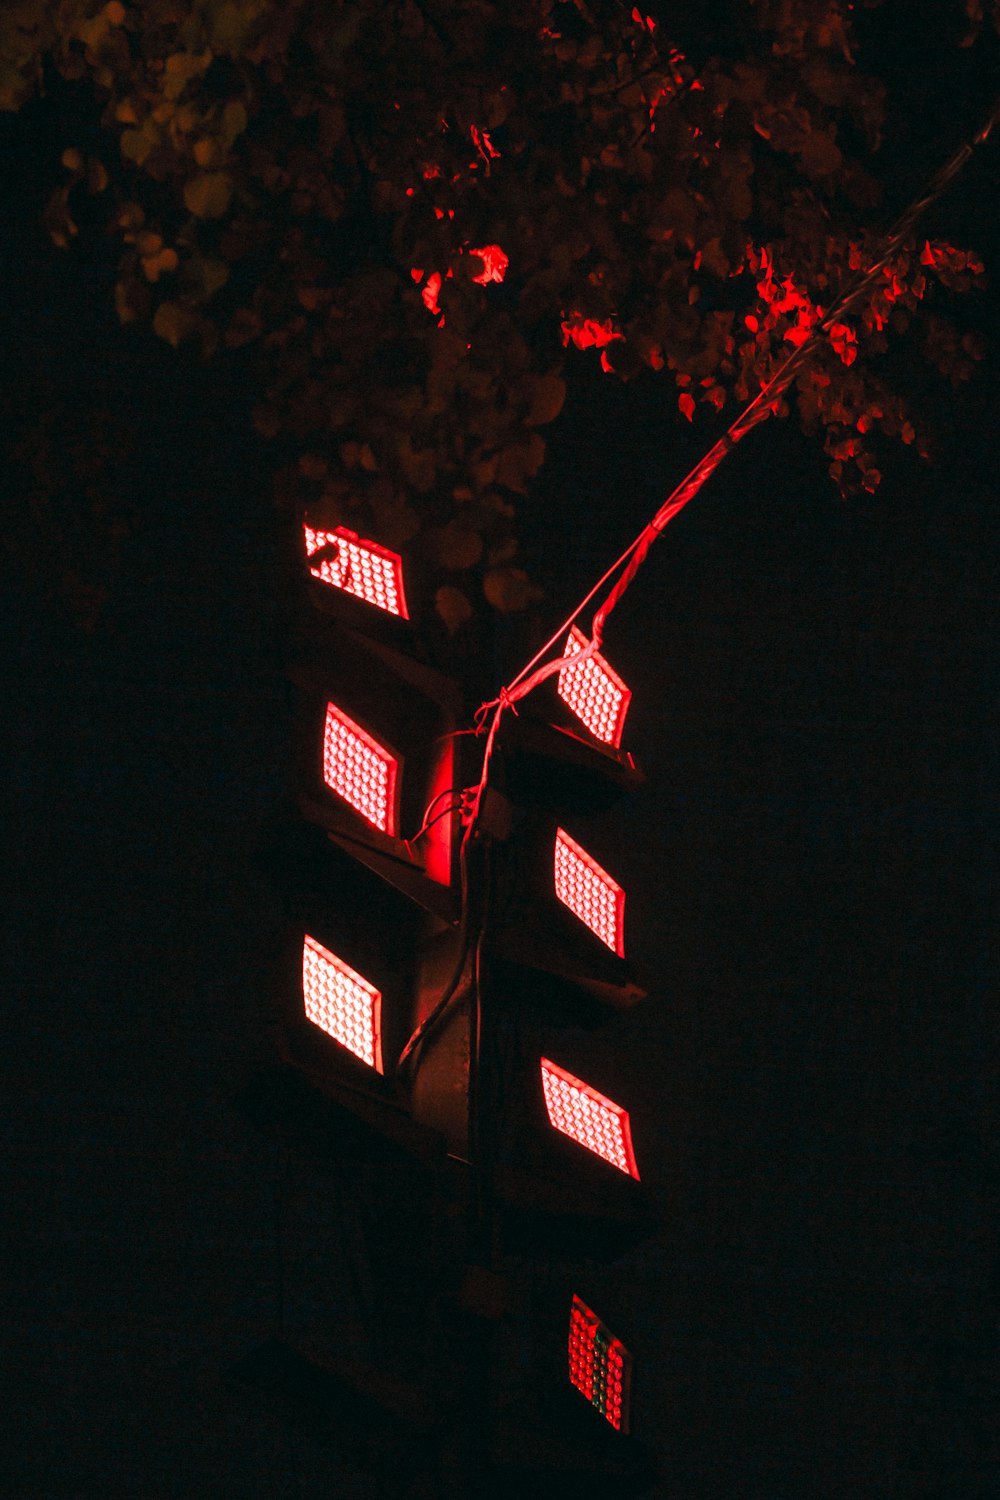 a traffic light is lit up in the dark